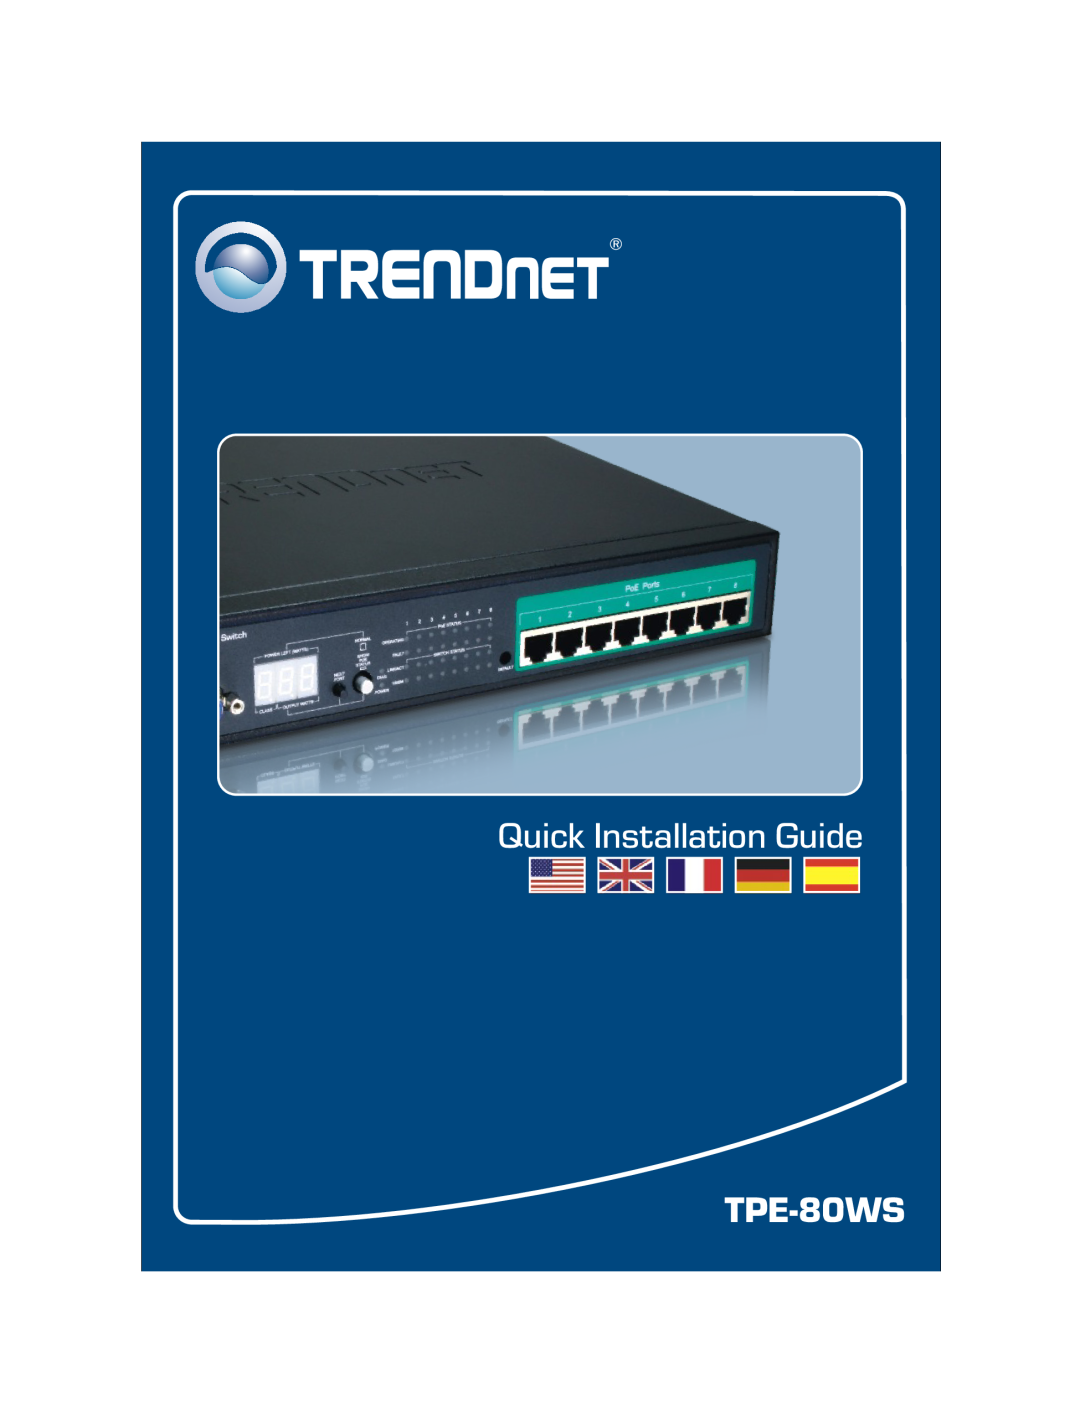 TRENDnet TPE-80WS manual Quick Installation Guide 